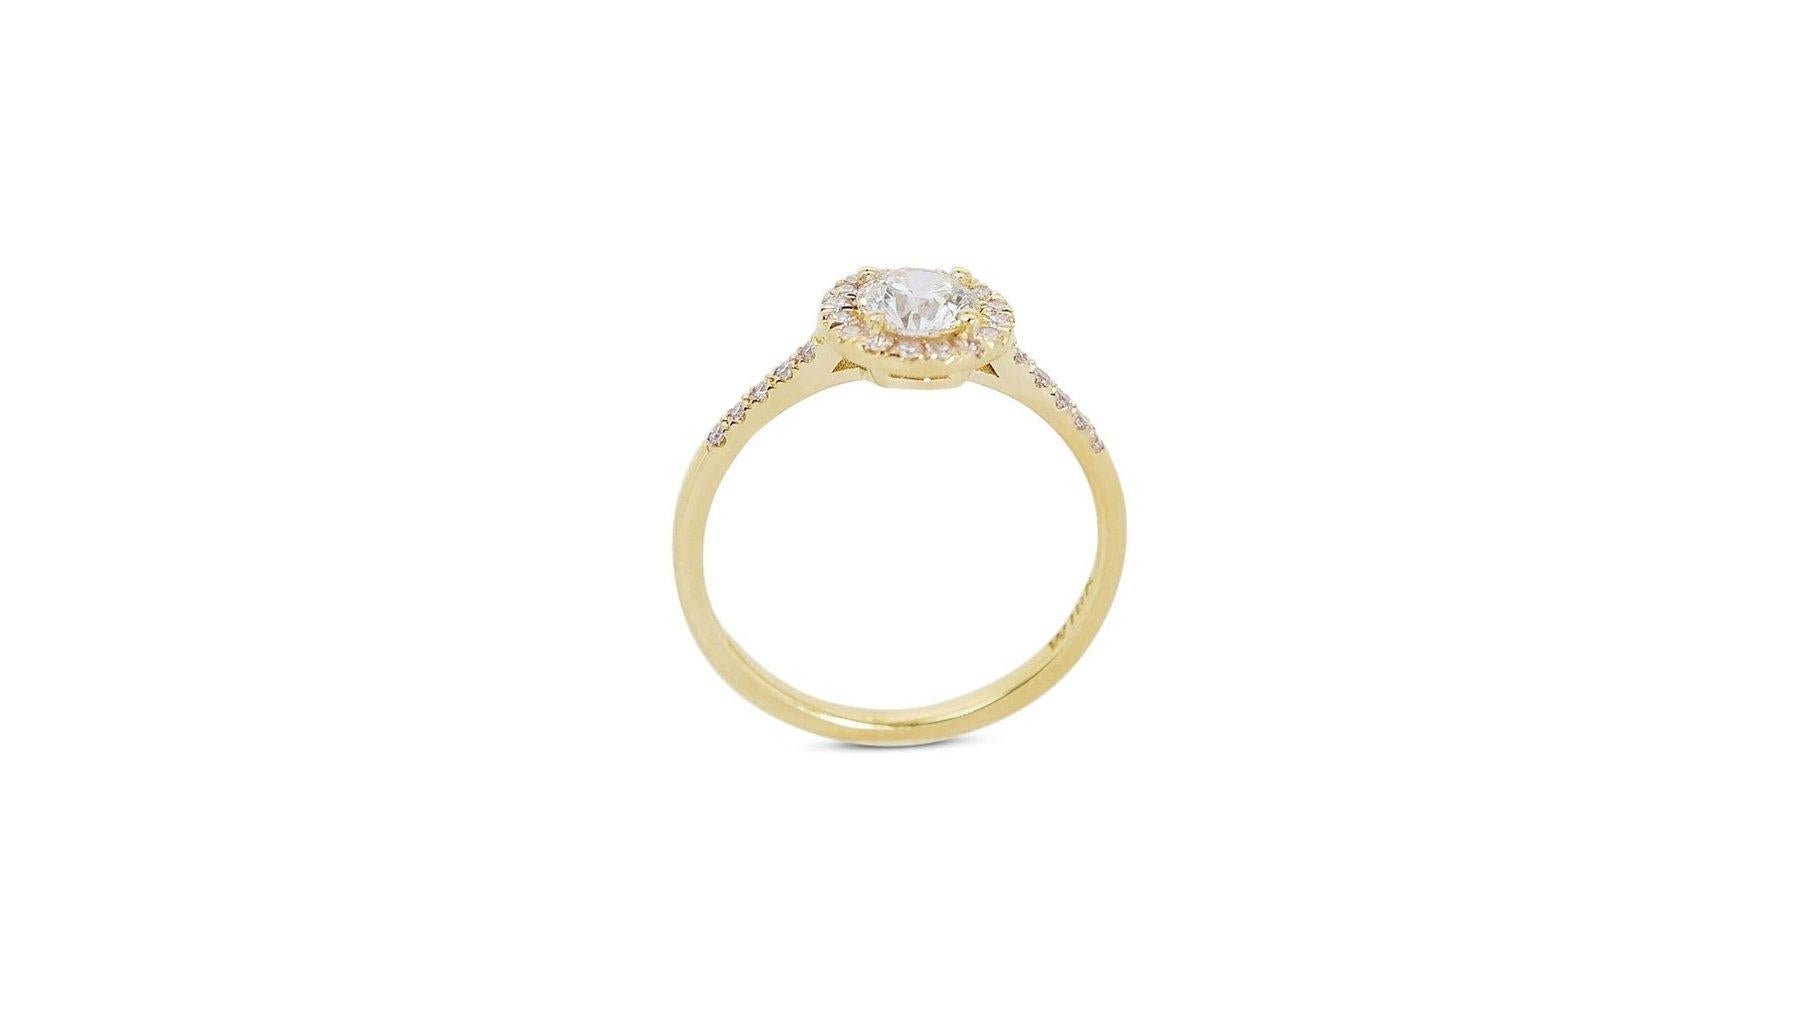 Captivating 18k Yellow Gold Natural Diamond Halo Ring w/1.21 ct- GIA Certified In New Condition For Sale In רמת גן, IL